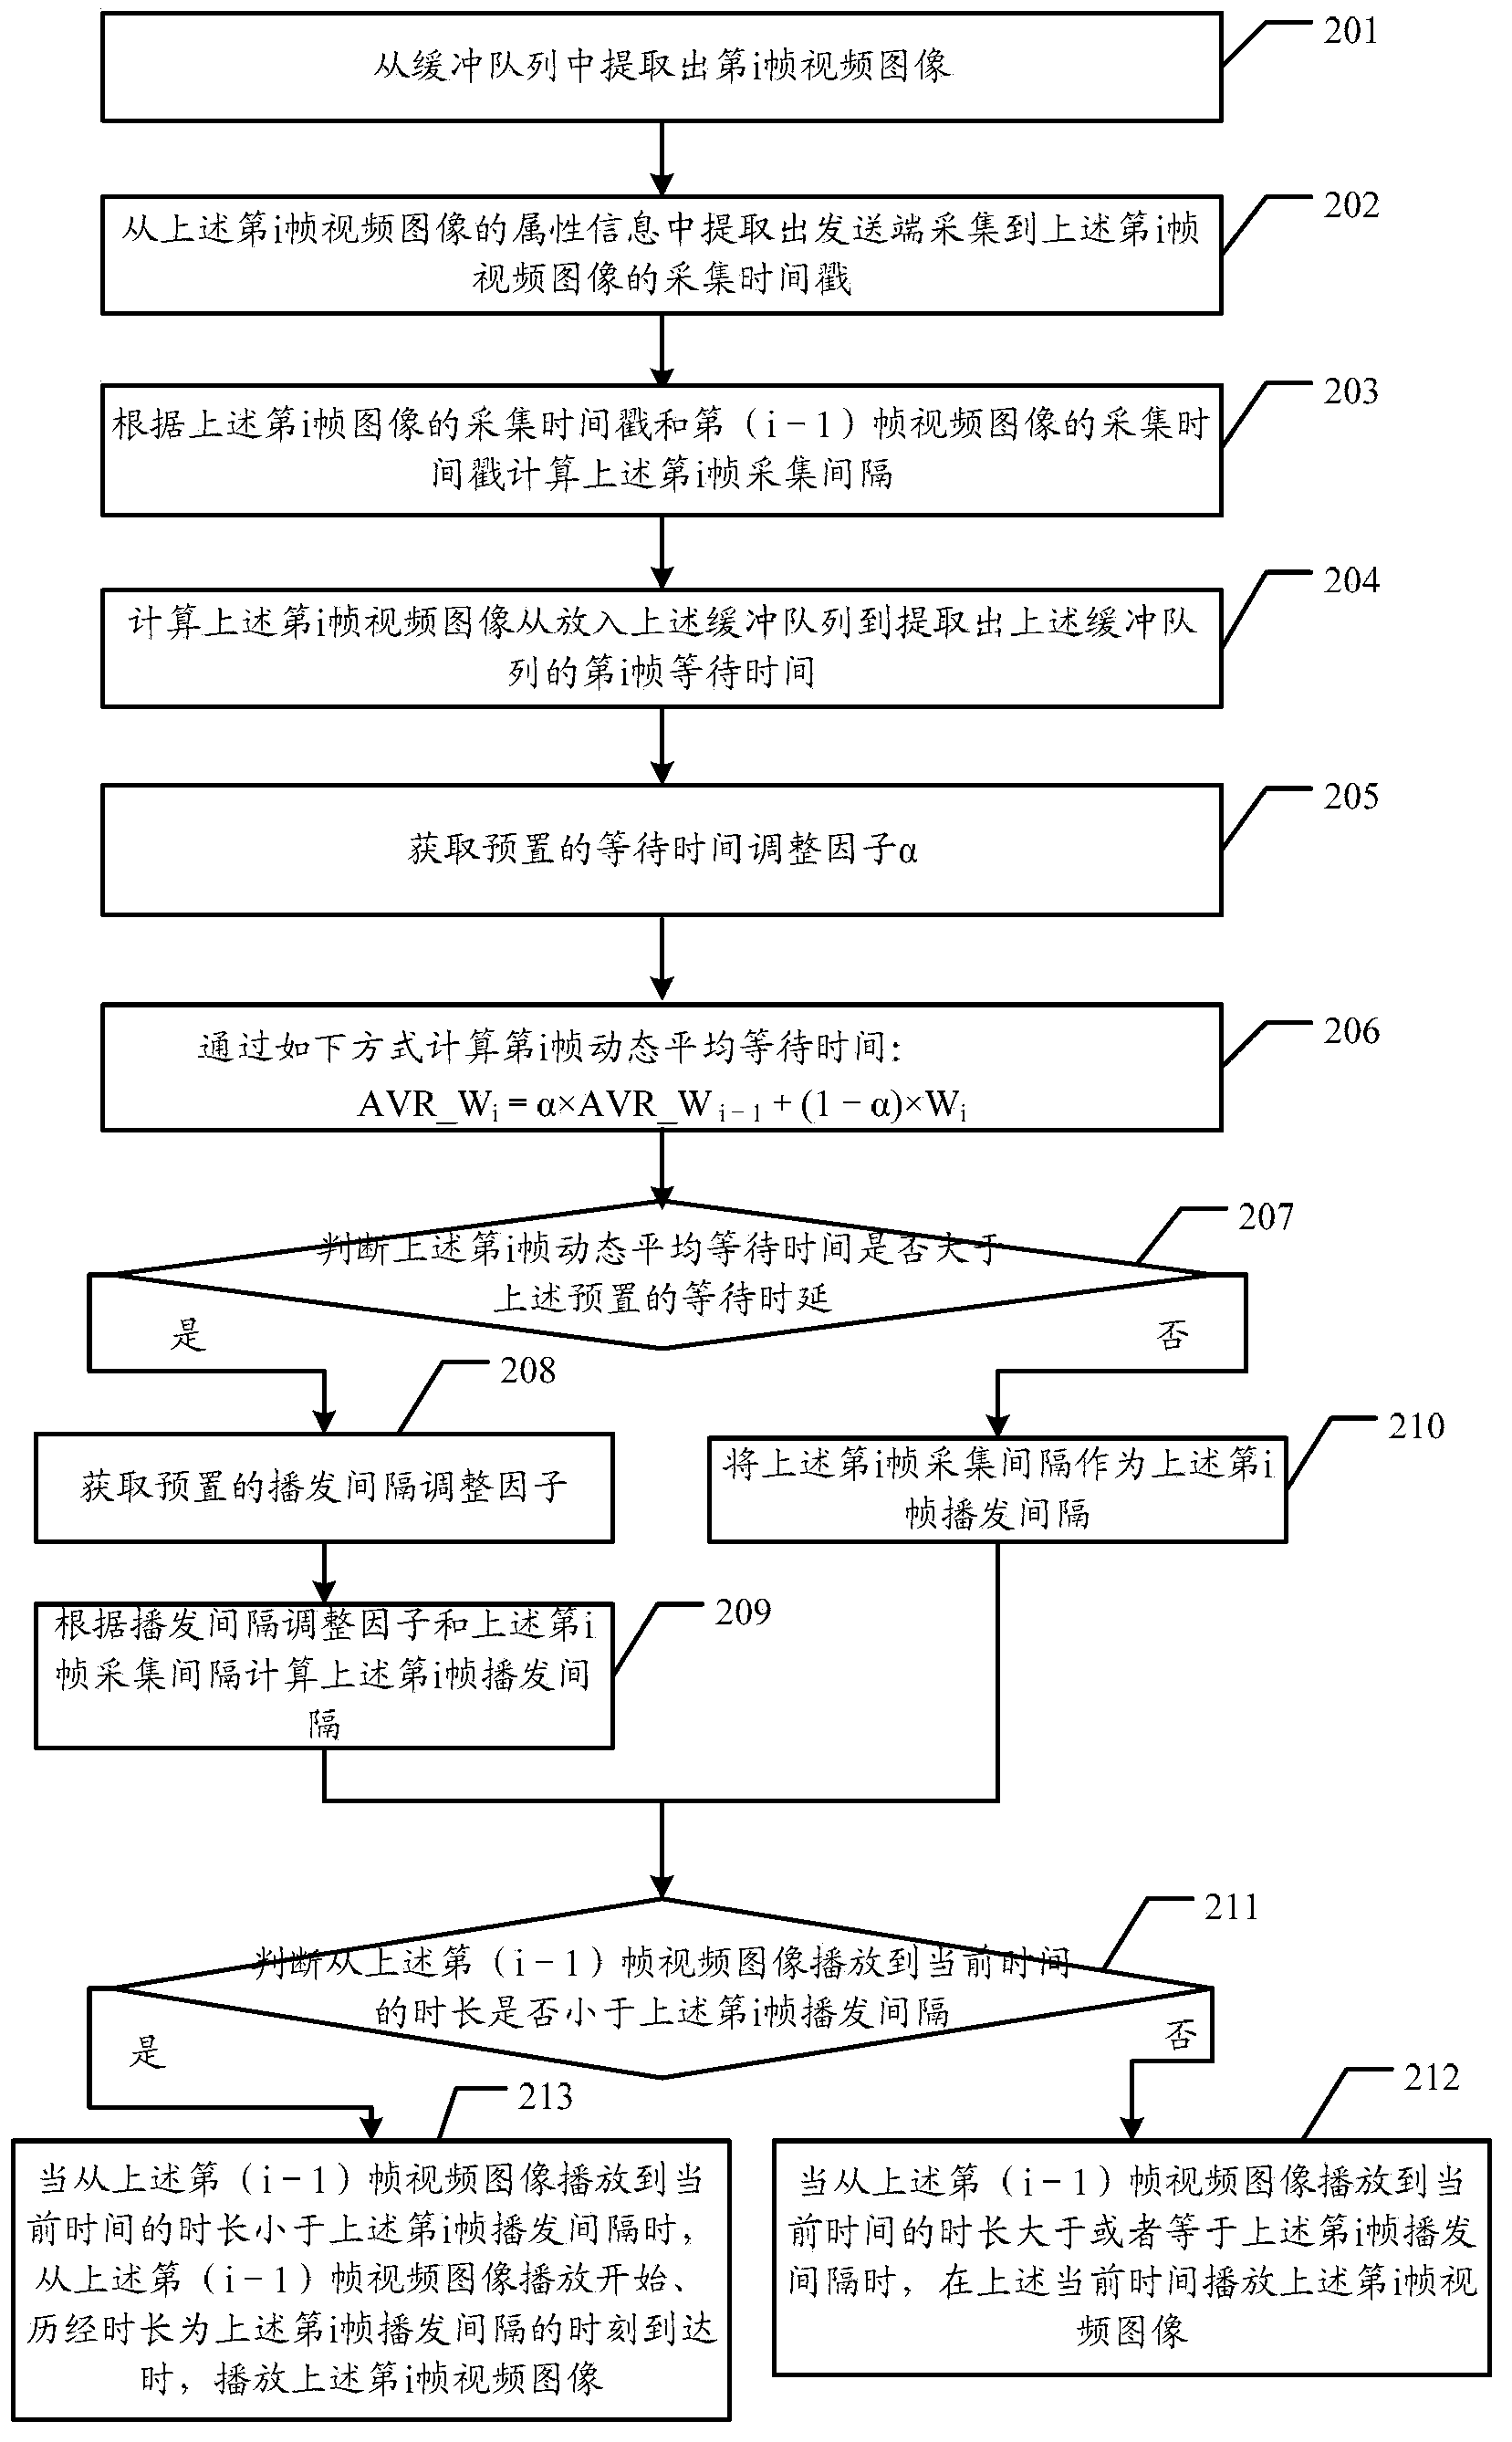 Video processing method and related device